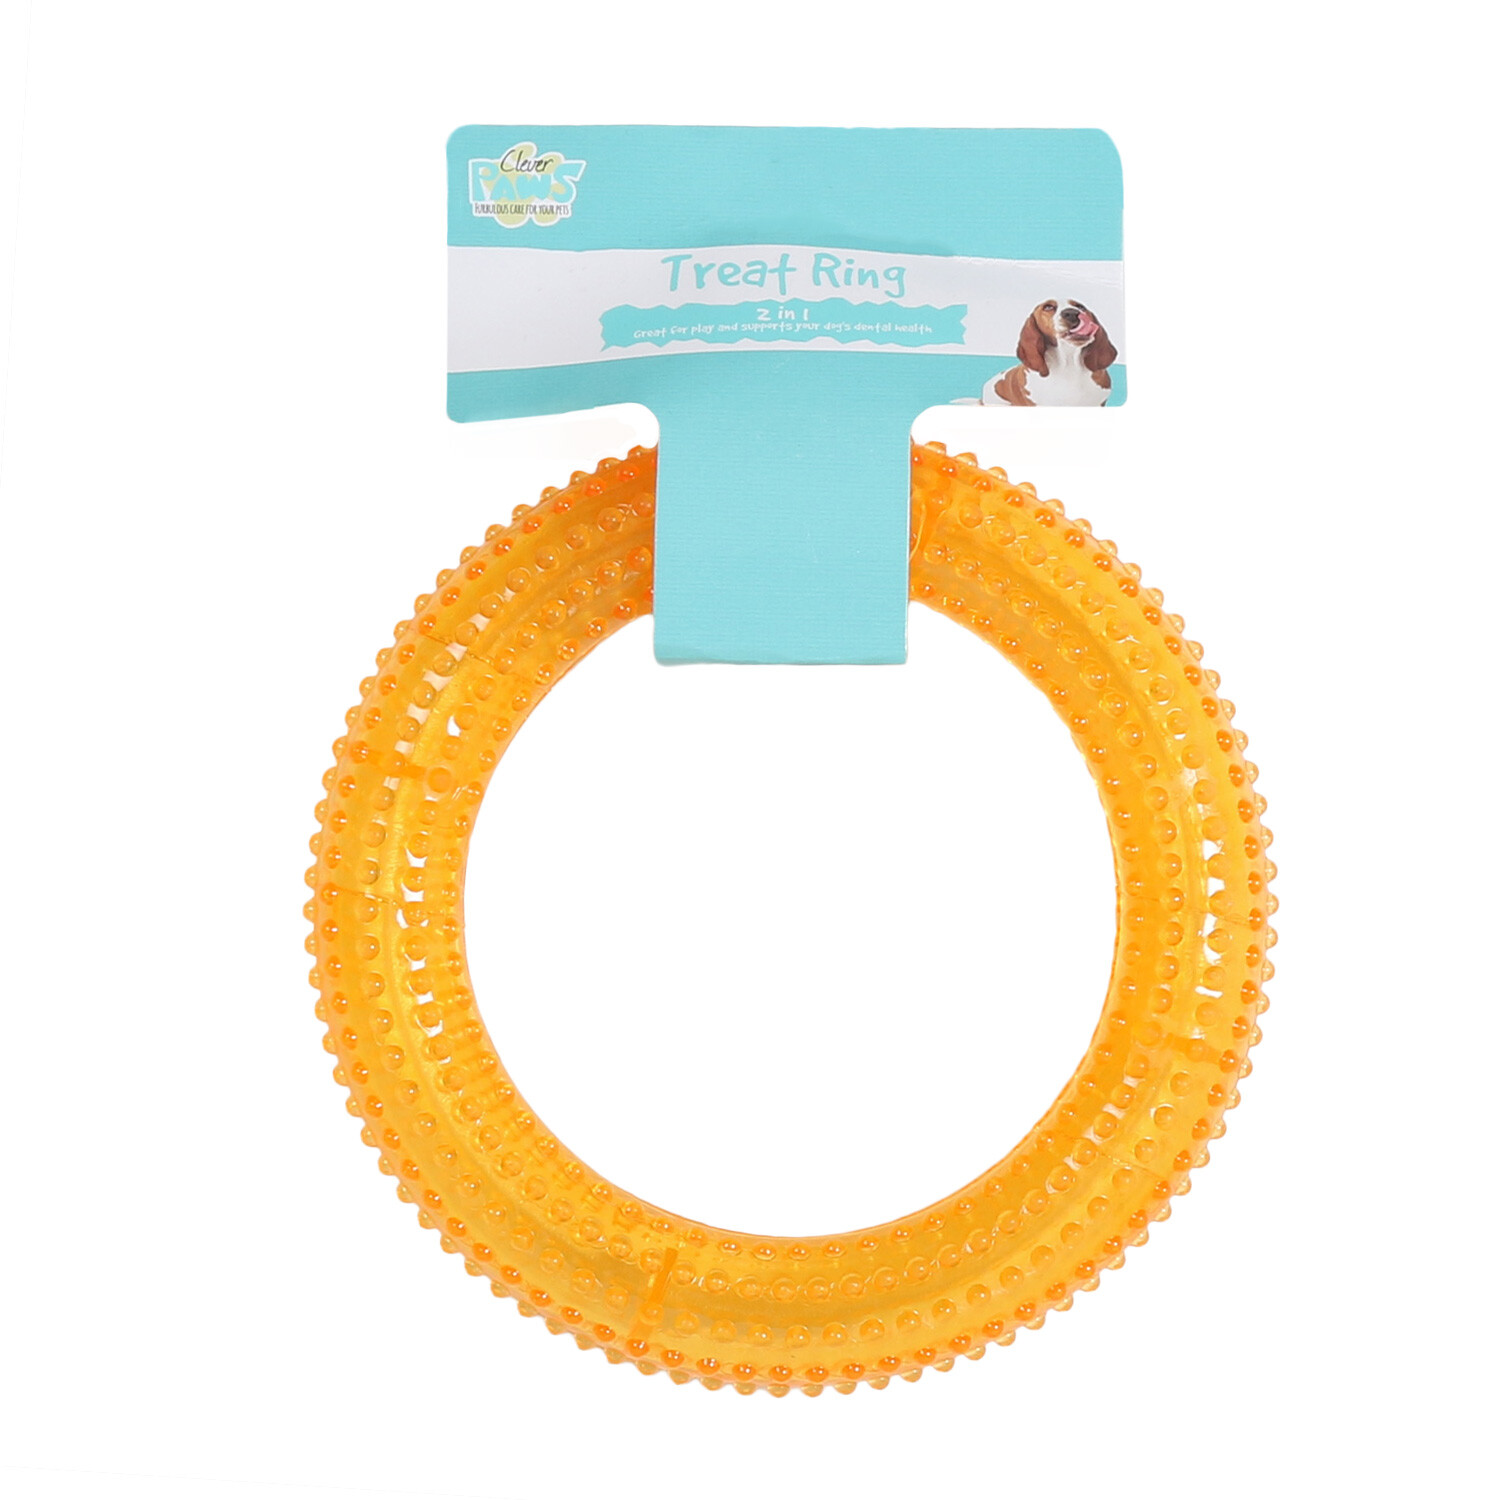 Single Clever Paws Dental Ring Treat Dog Toy in Assorted styles Image 1